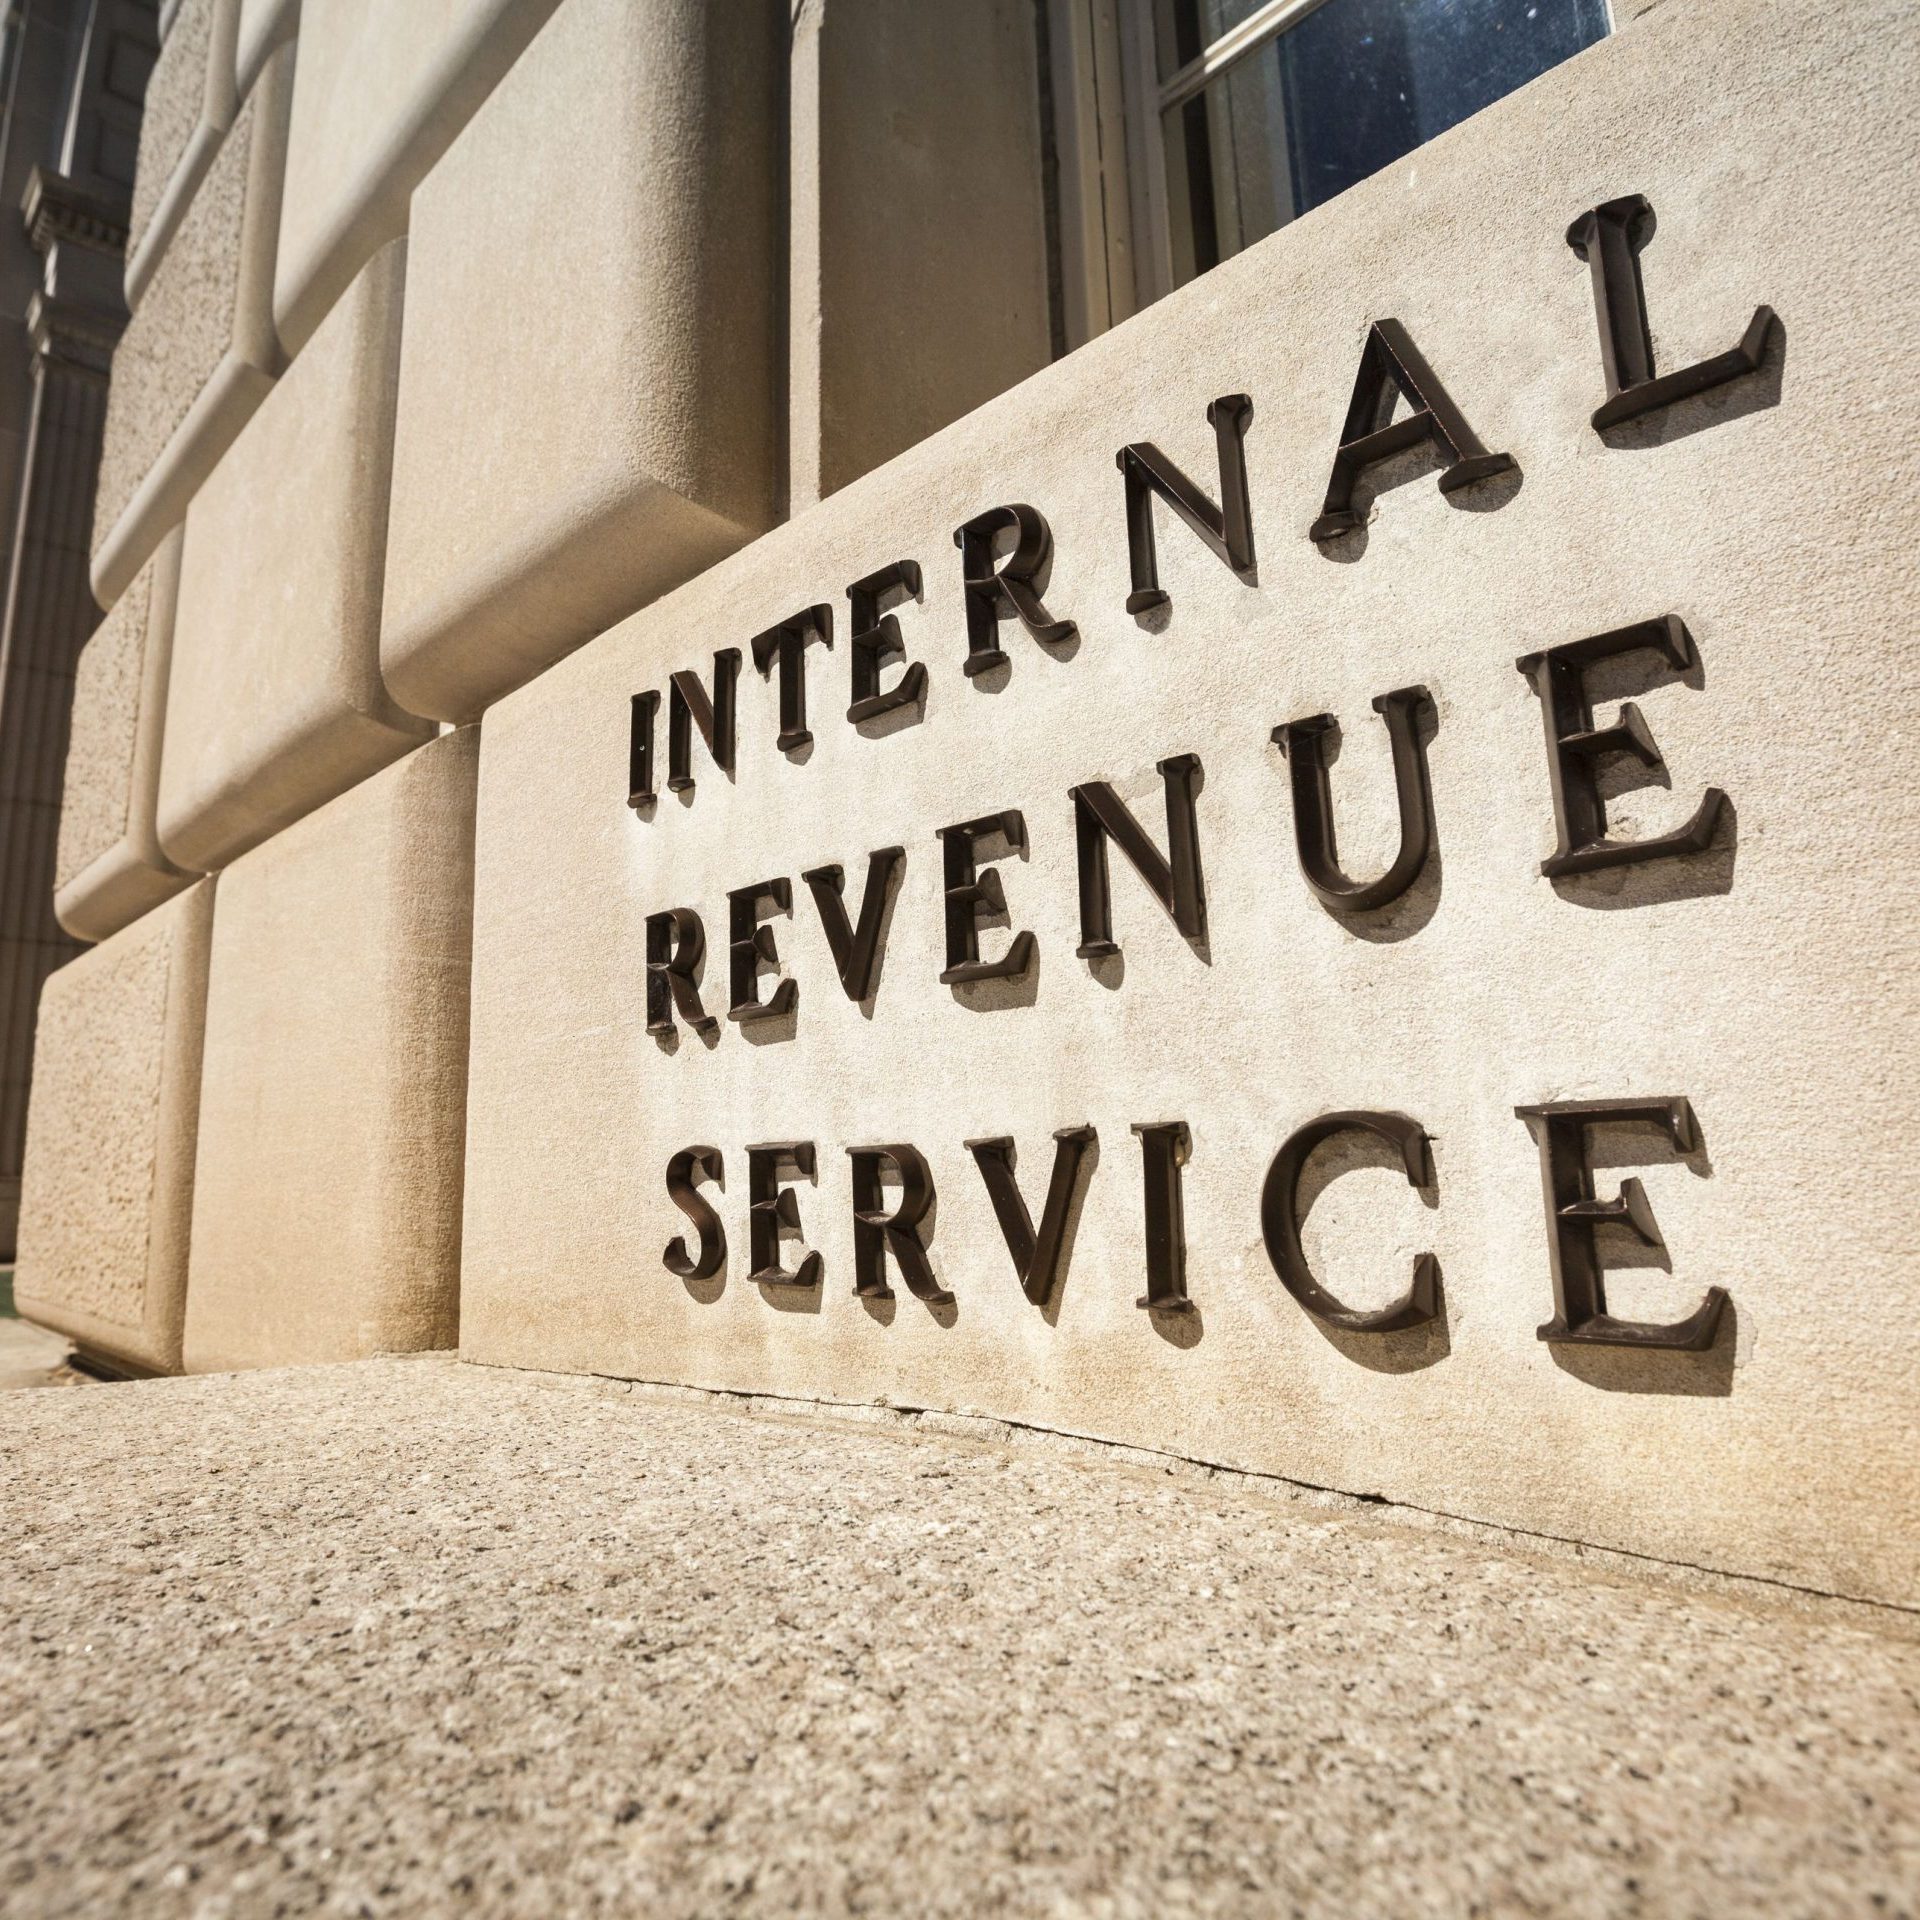 IRS EXTENDS FILING DEADLINE TO JULY 15